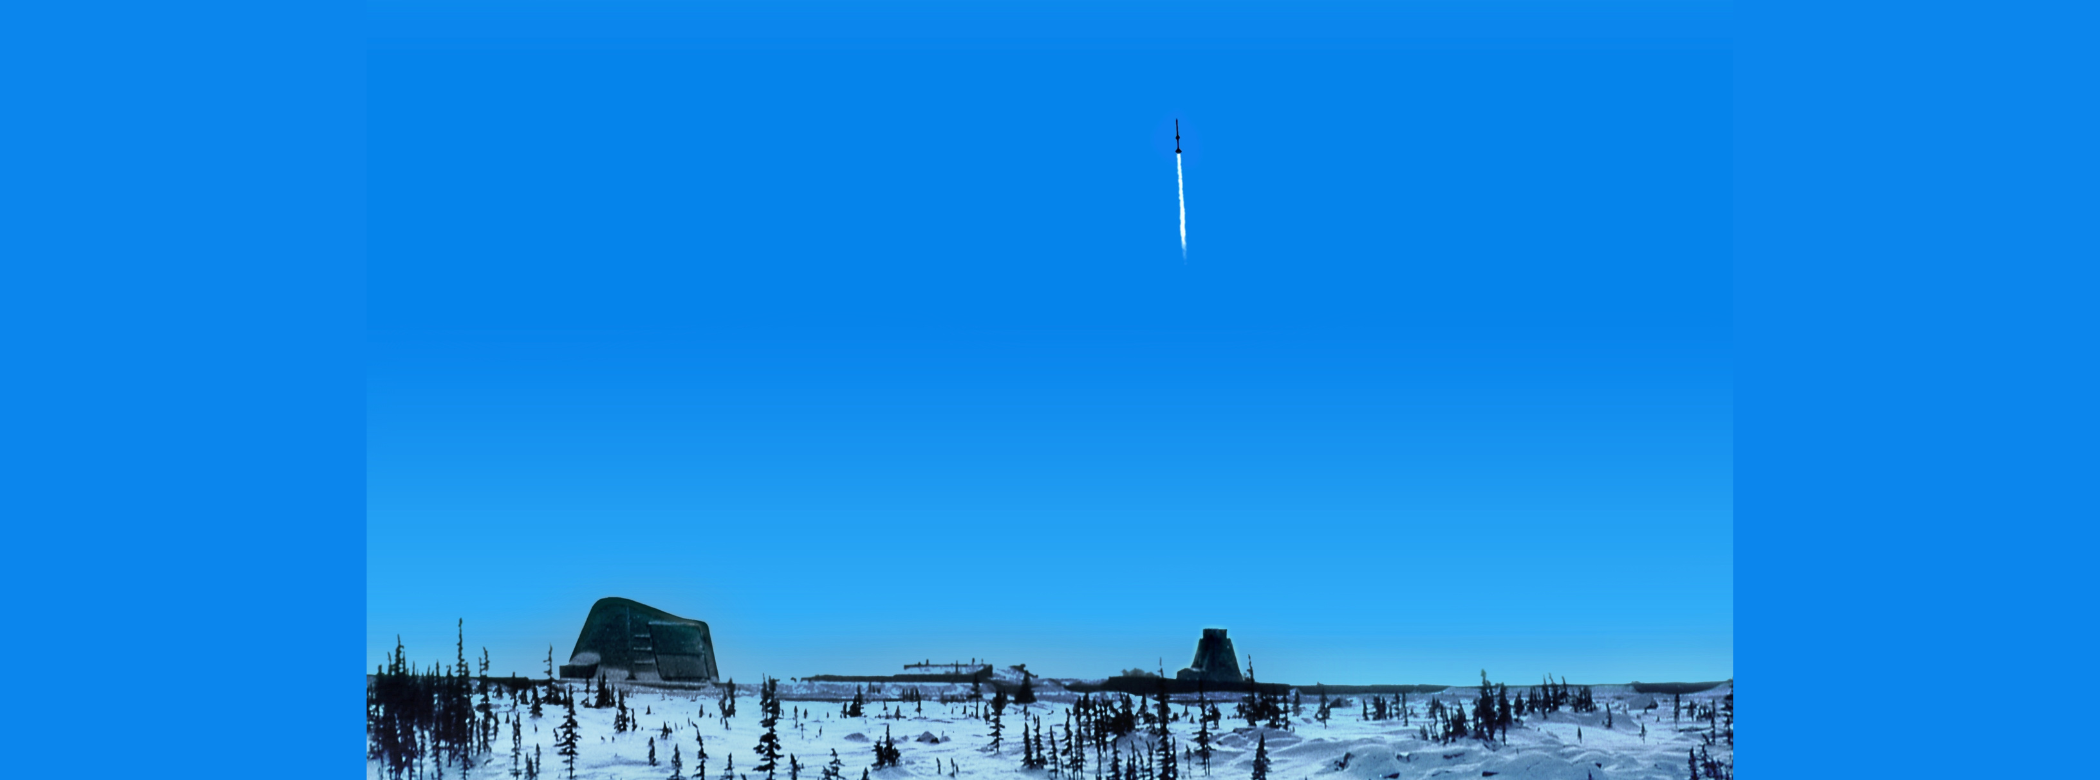 A two-stage rocket departs for space on a clear day in Churchill. A rocket rises up in a blue sky over snowy ground with clusters of trees.